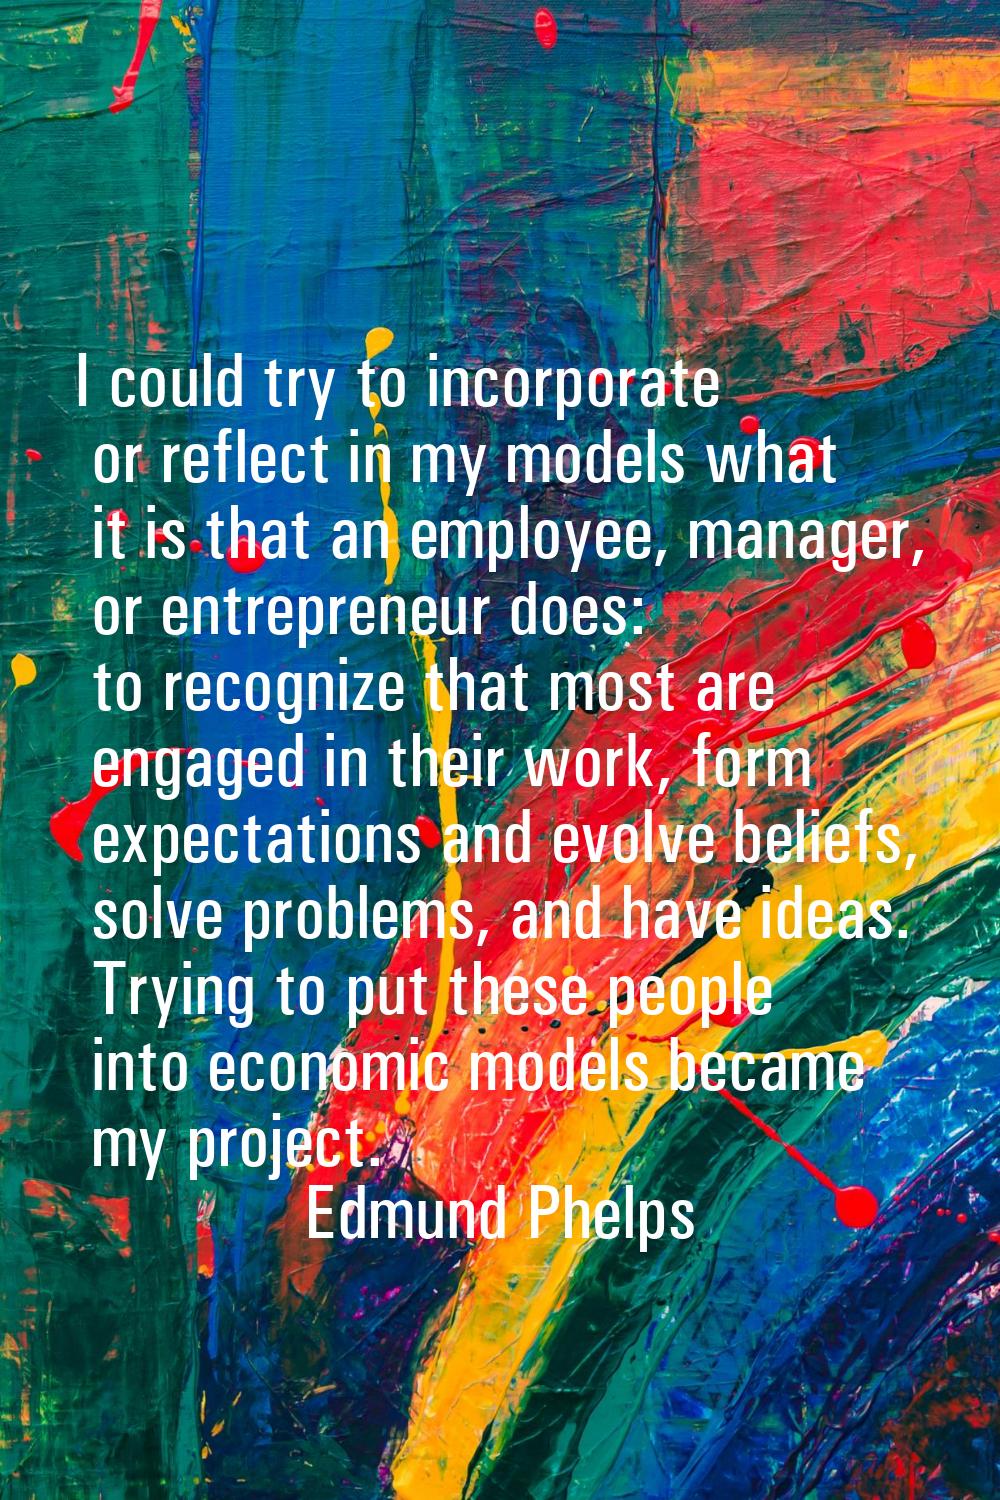 I could try to incorporate or reflect in my models what it is that an employee, manager, or entrepr